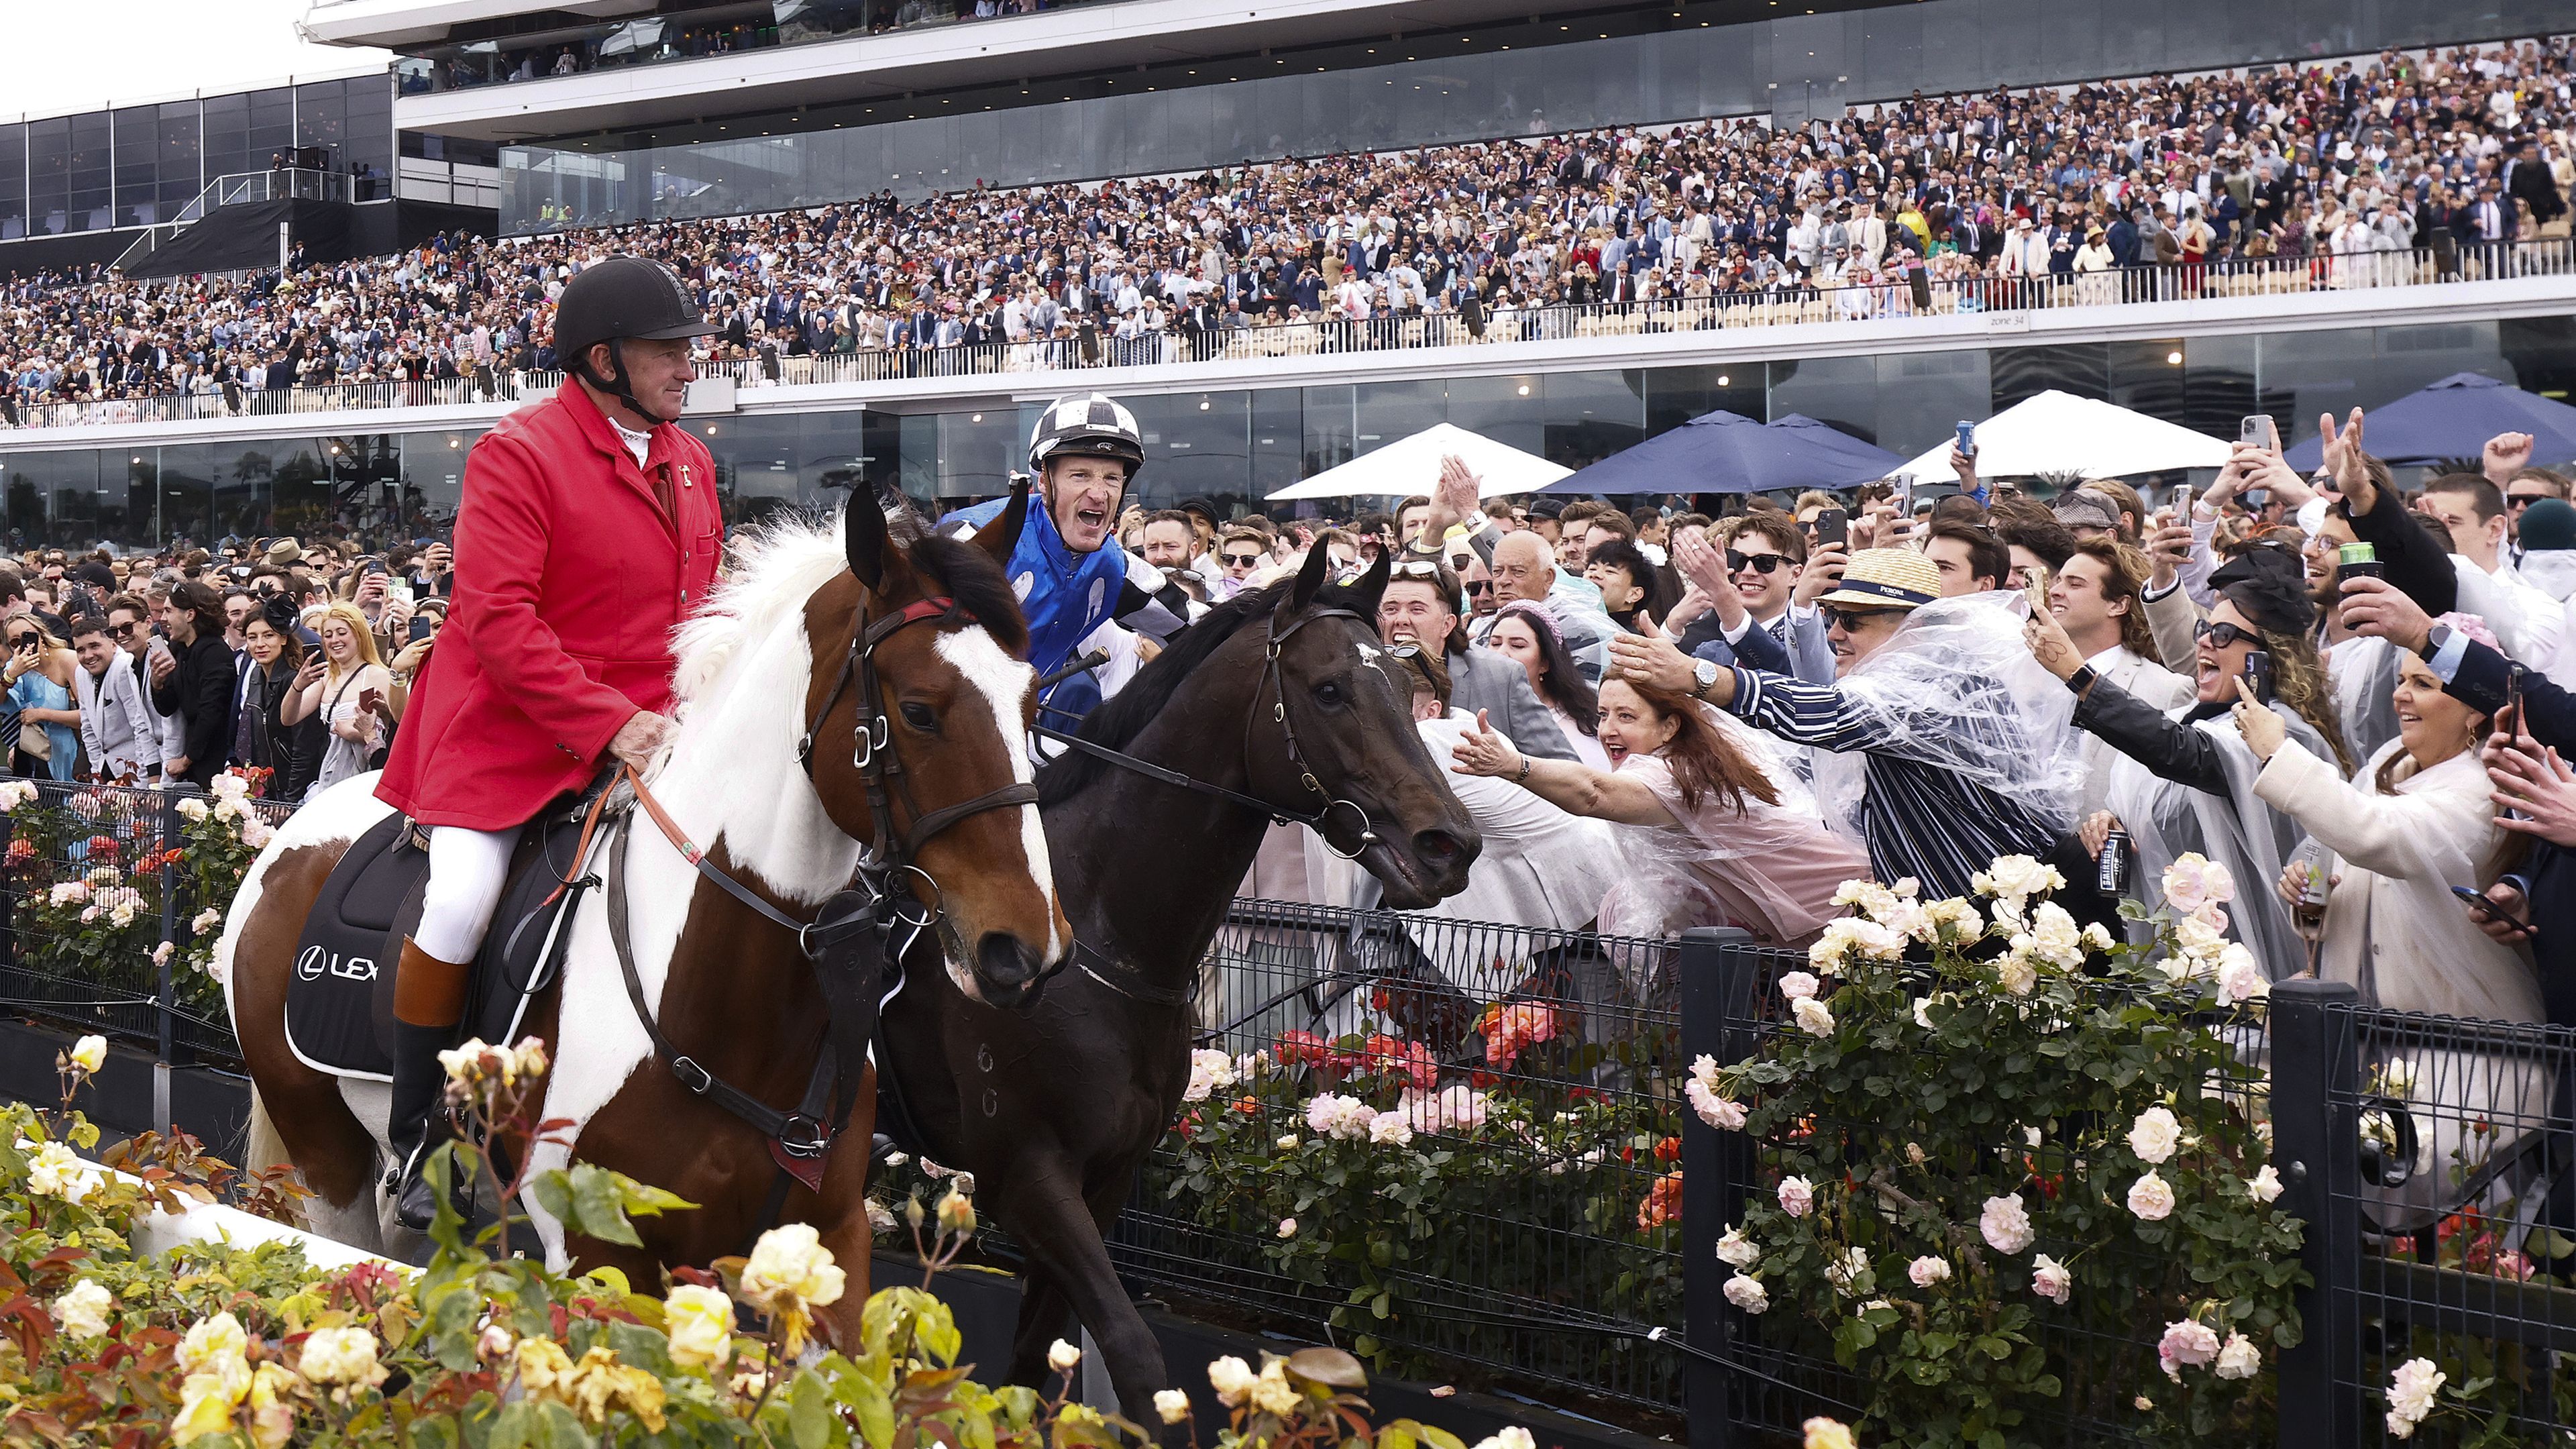 'Possibly severe' thunderstorm tipped to hit Flemington on Melbourne Cup day